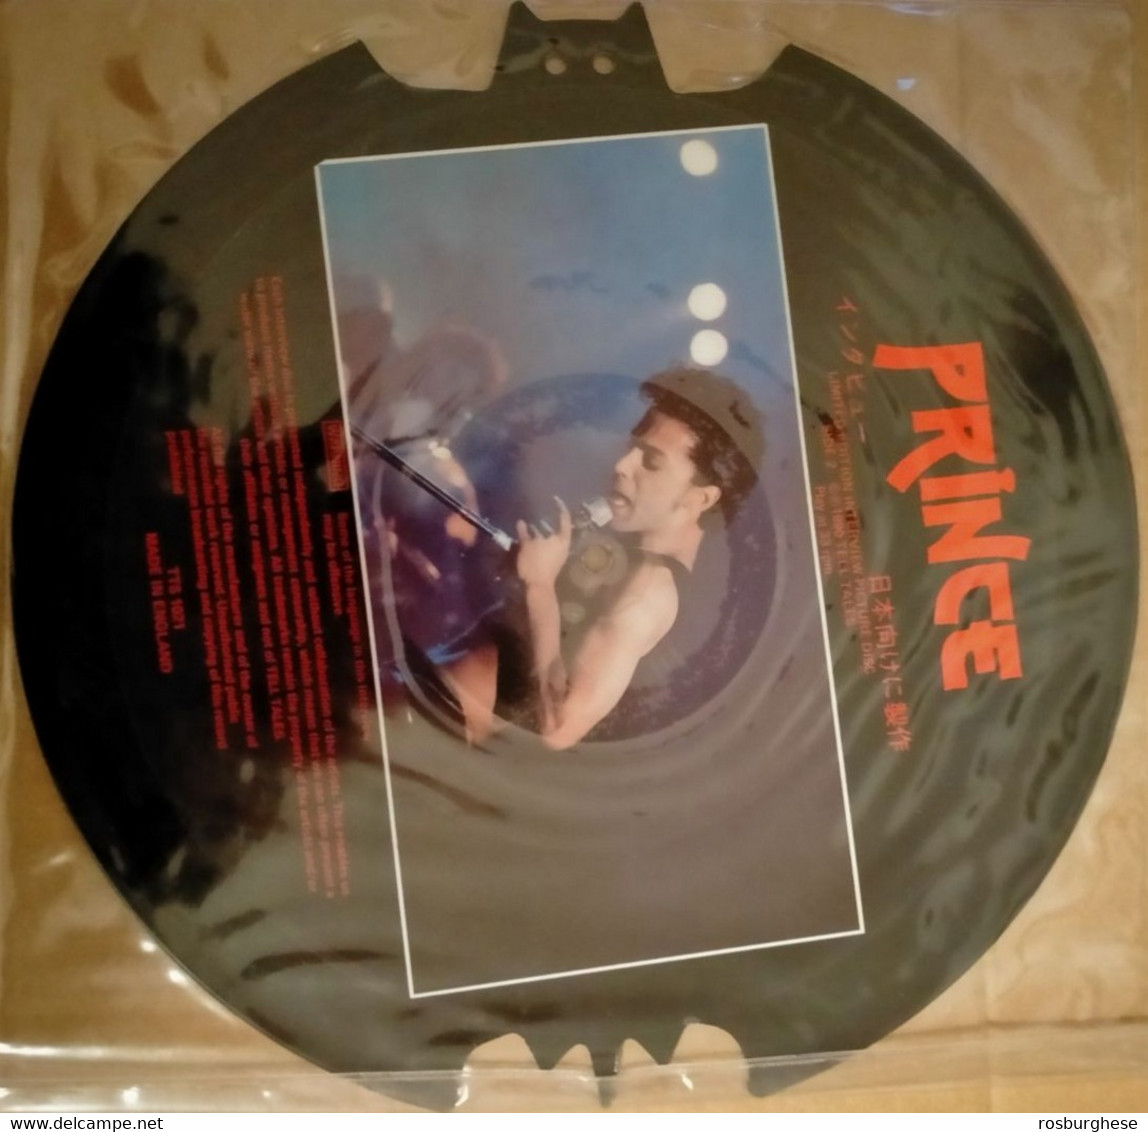 Prince An Interview With Prince 12" VINIKE SHAPE Picture Forma Di Pipistrello - Editions Limitées